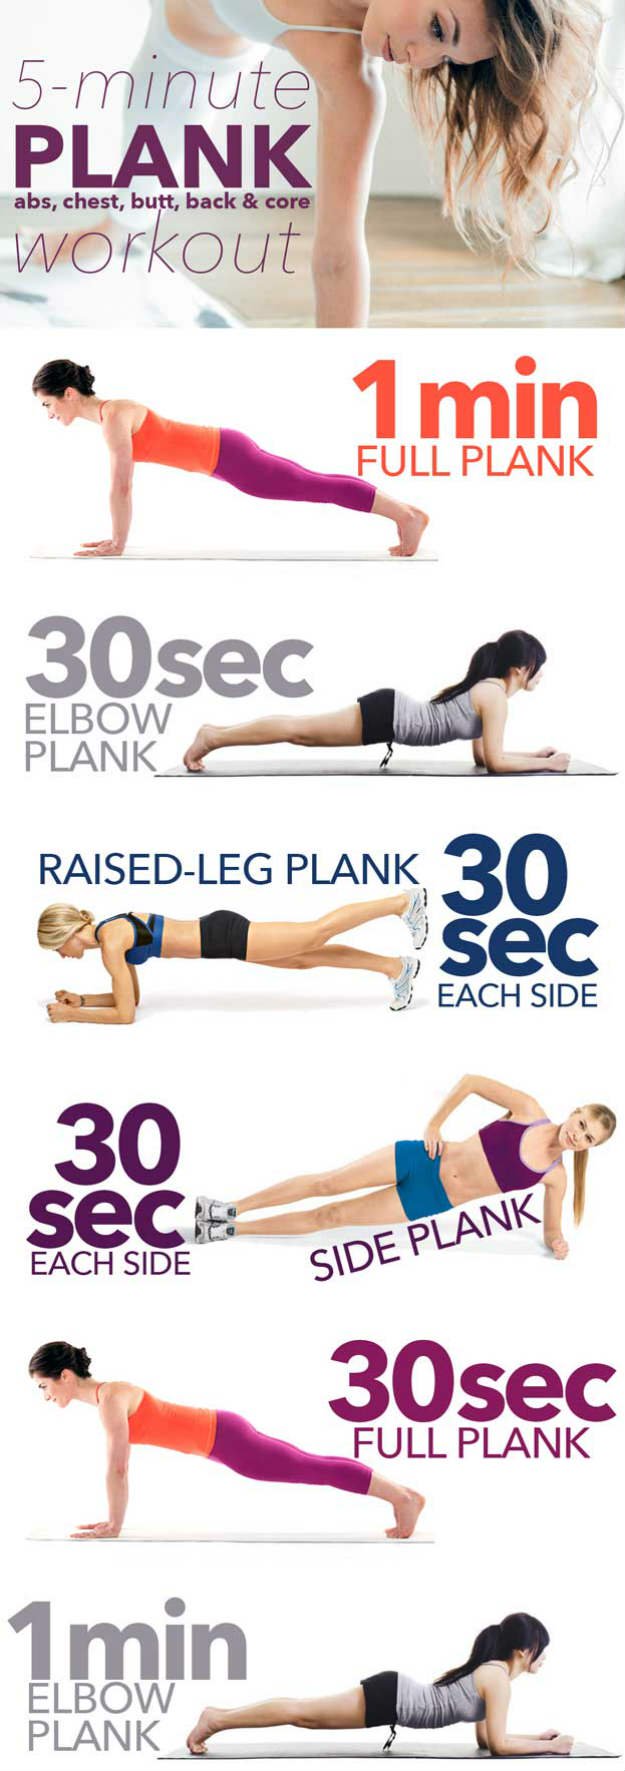 5-Minute "Almost No Work" Plank Workout | Best Fitness Workouts for Head to Toe Toning | Makeup Tutorials